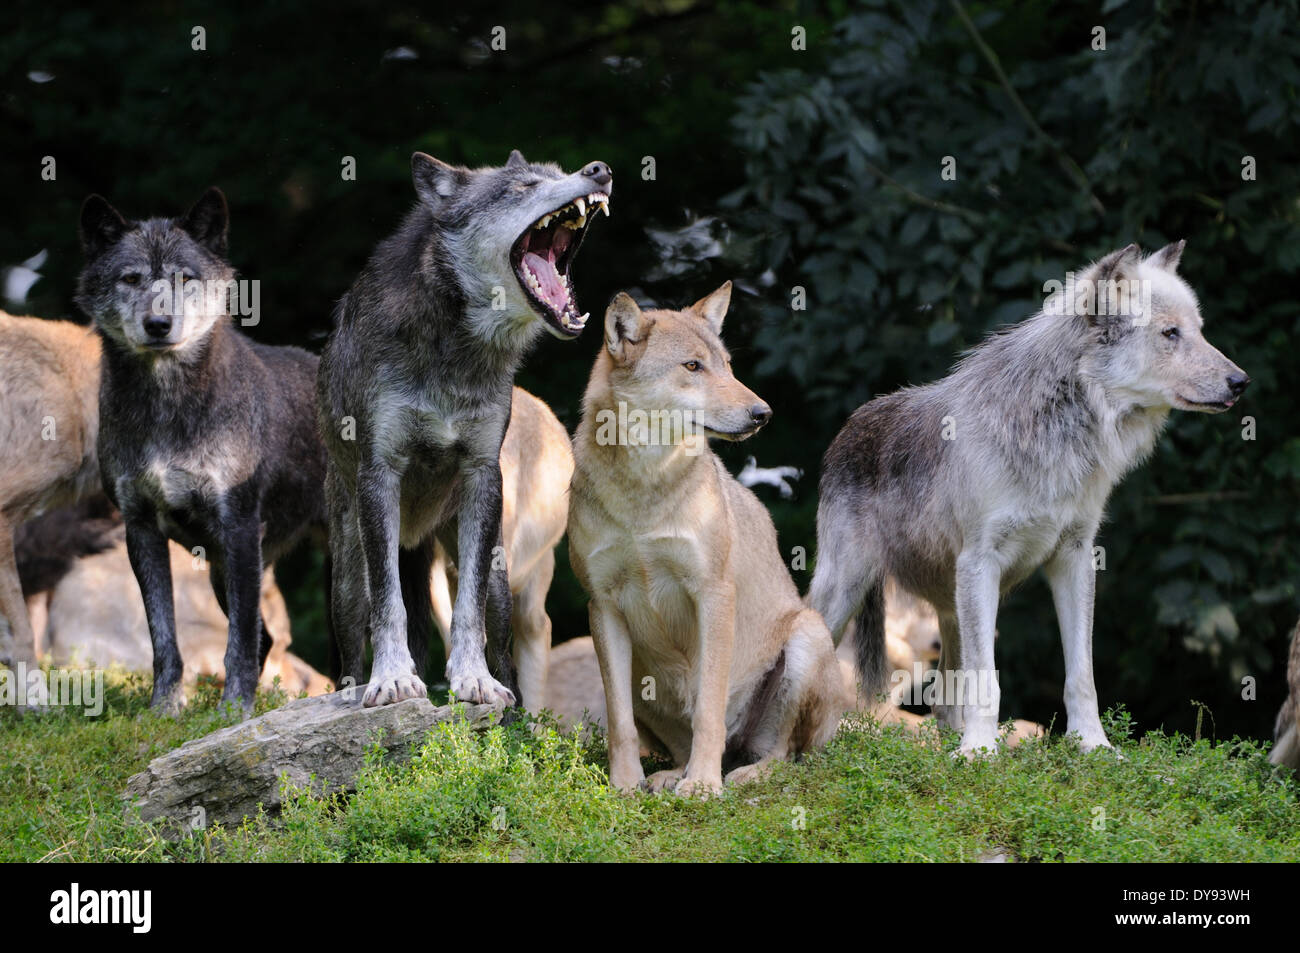 Eastern Timber wolf Canis lupus lycaon American gray wolf Wolf gray wolf canids dogs Canis predator wolves herd herd behavior, Stock Photo